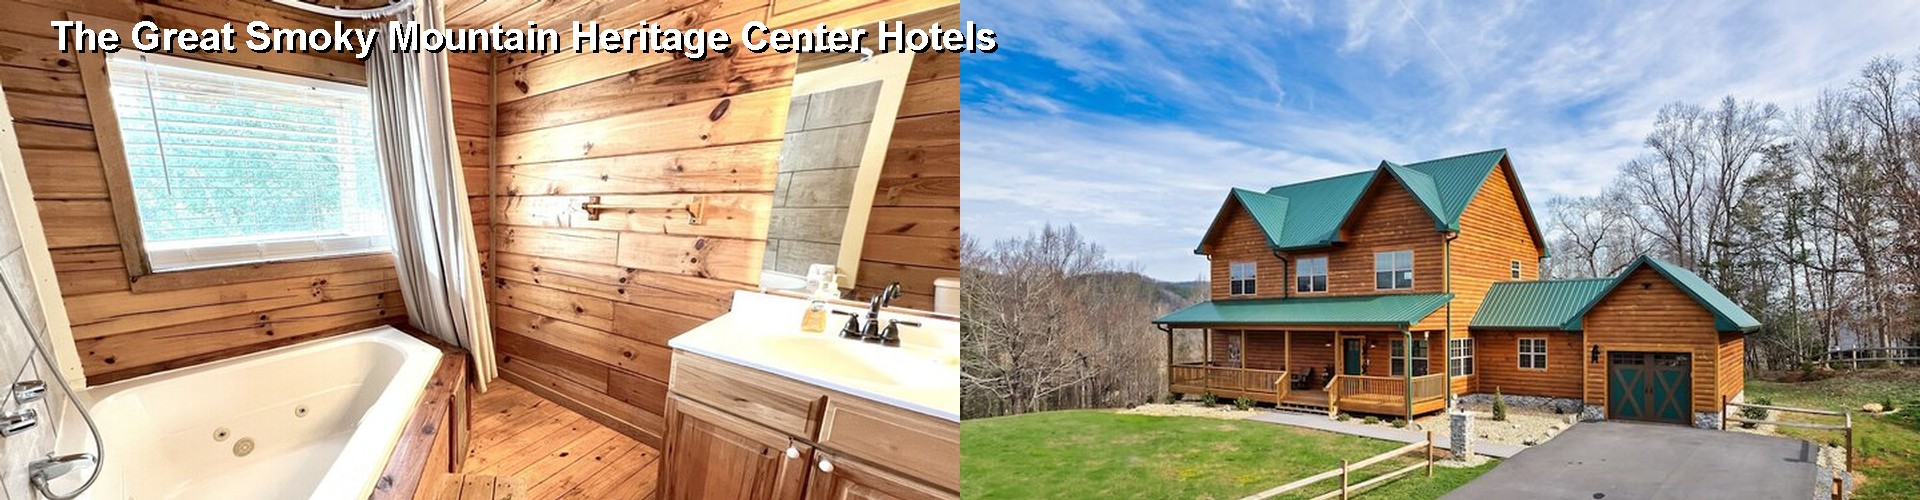 5 Best Hotels near The Great Smoky Mountain Heritage Center